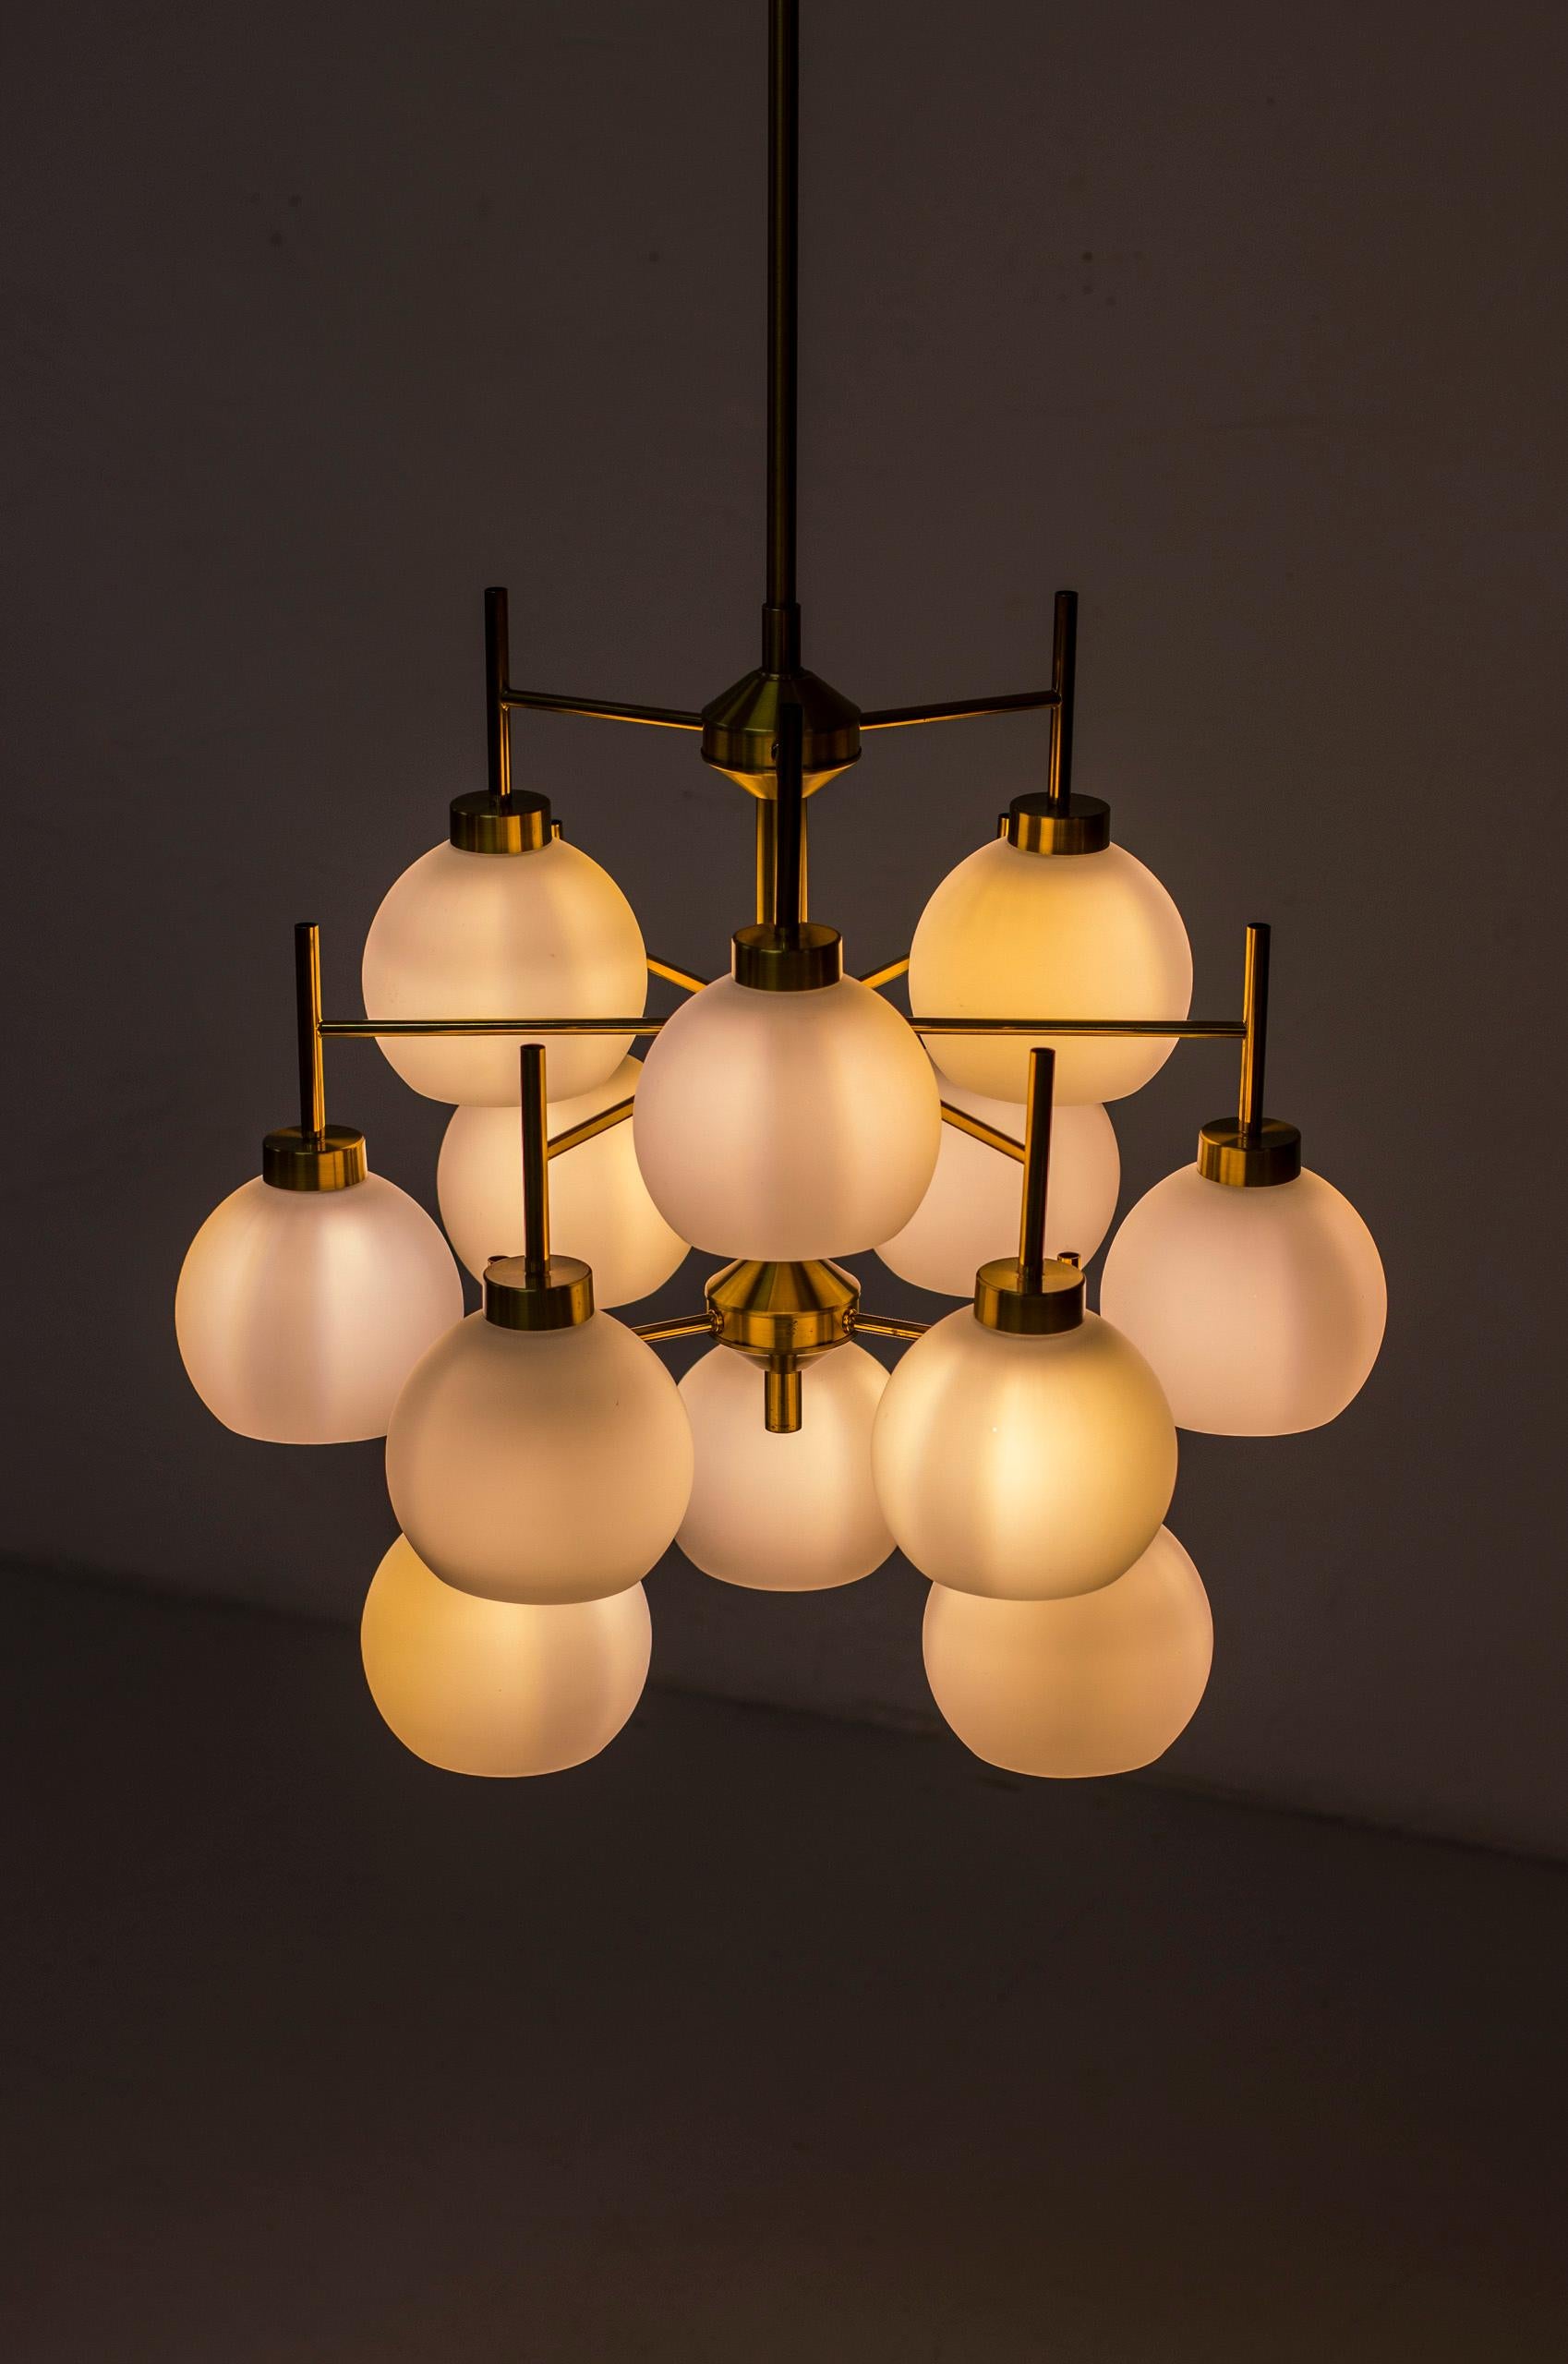 Mid-20th Century Brass and Opaline Chandeliers by Holger Johansson for Westal, Sweden, 1960s